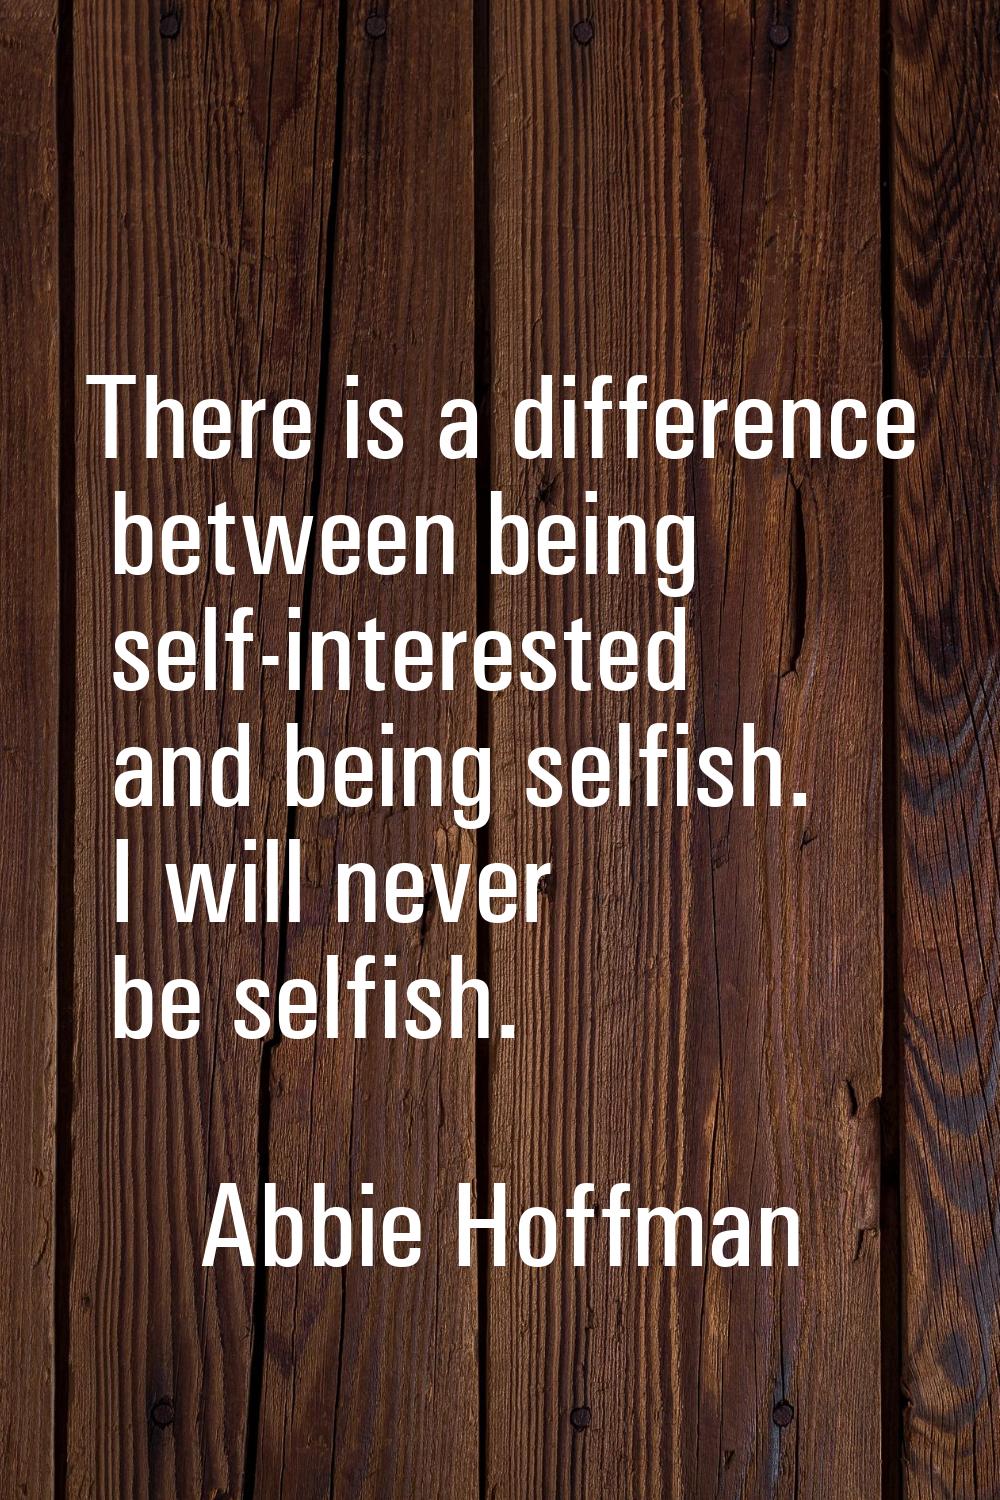 There is a difference between being self-interested and being selfish. I will never be selfish.